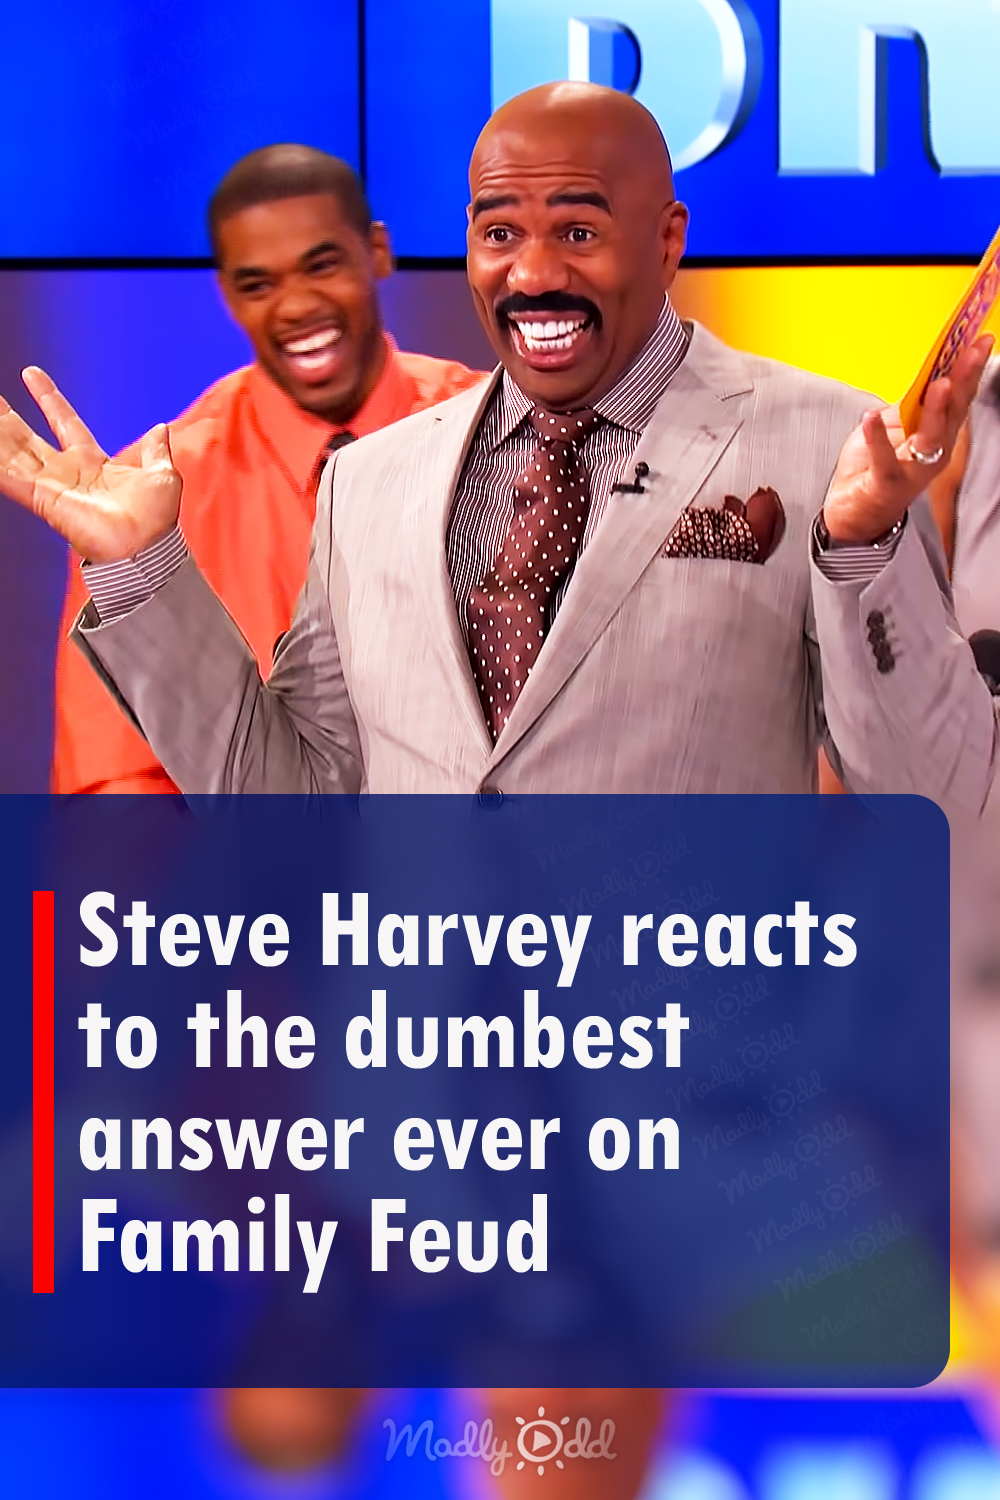 Steve Harvey reacts to the dumbest answer ever on Family Feud